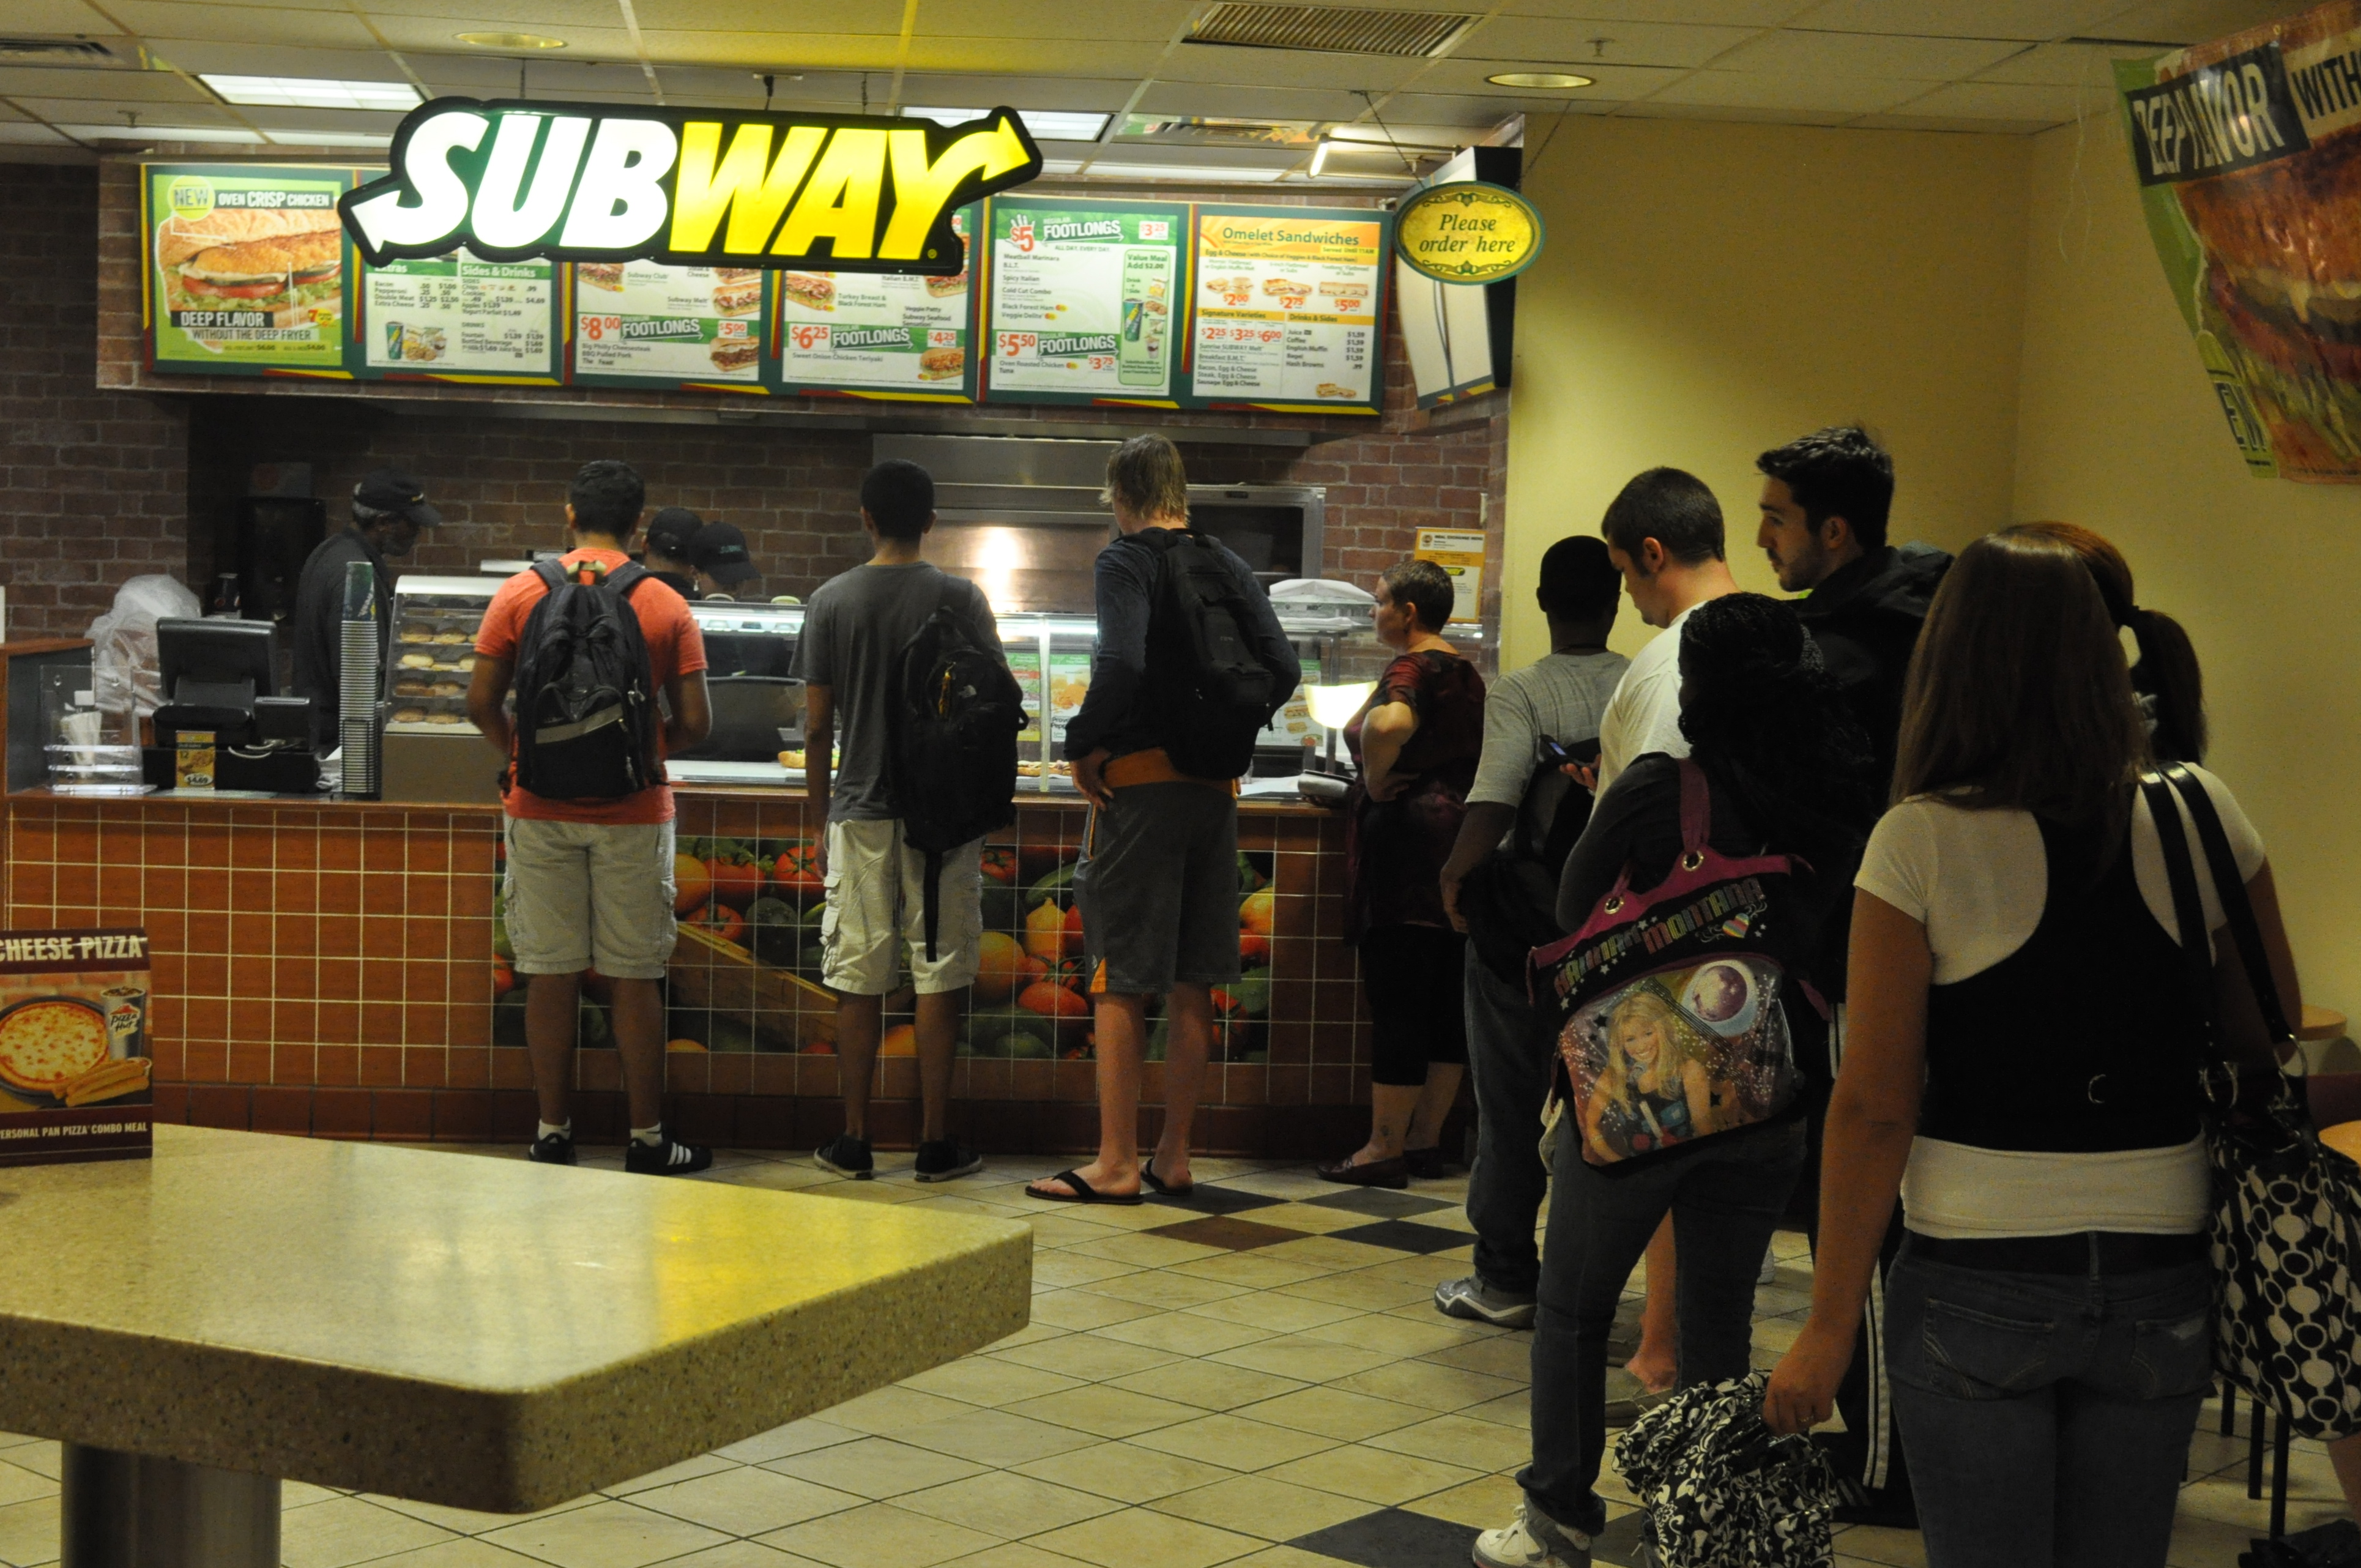 Have you ever heard of Subway?